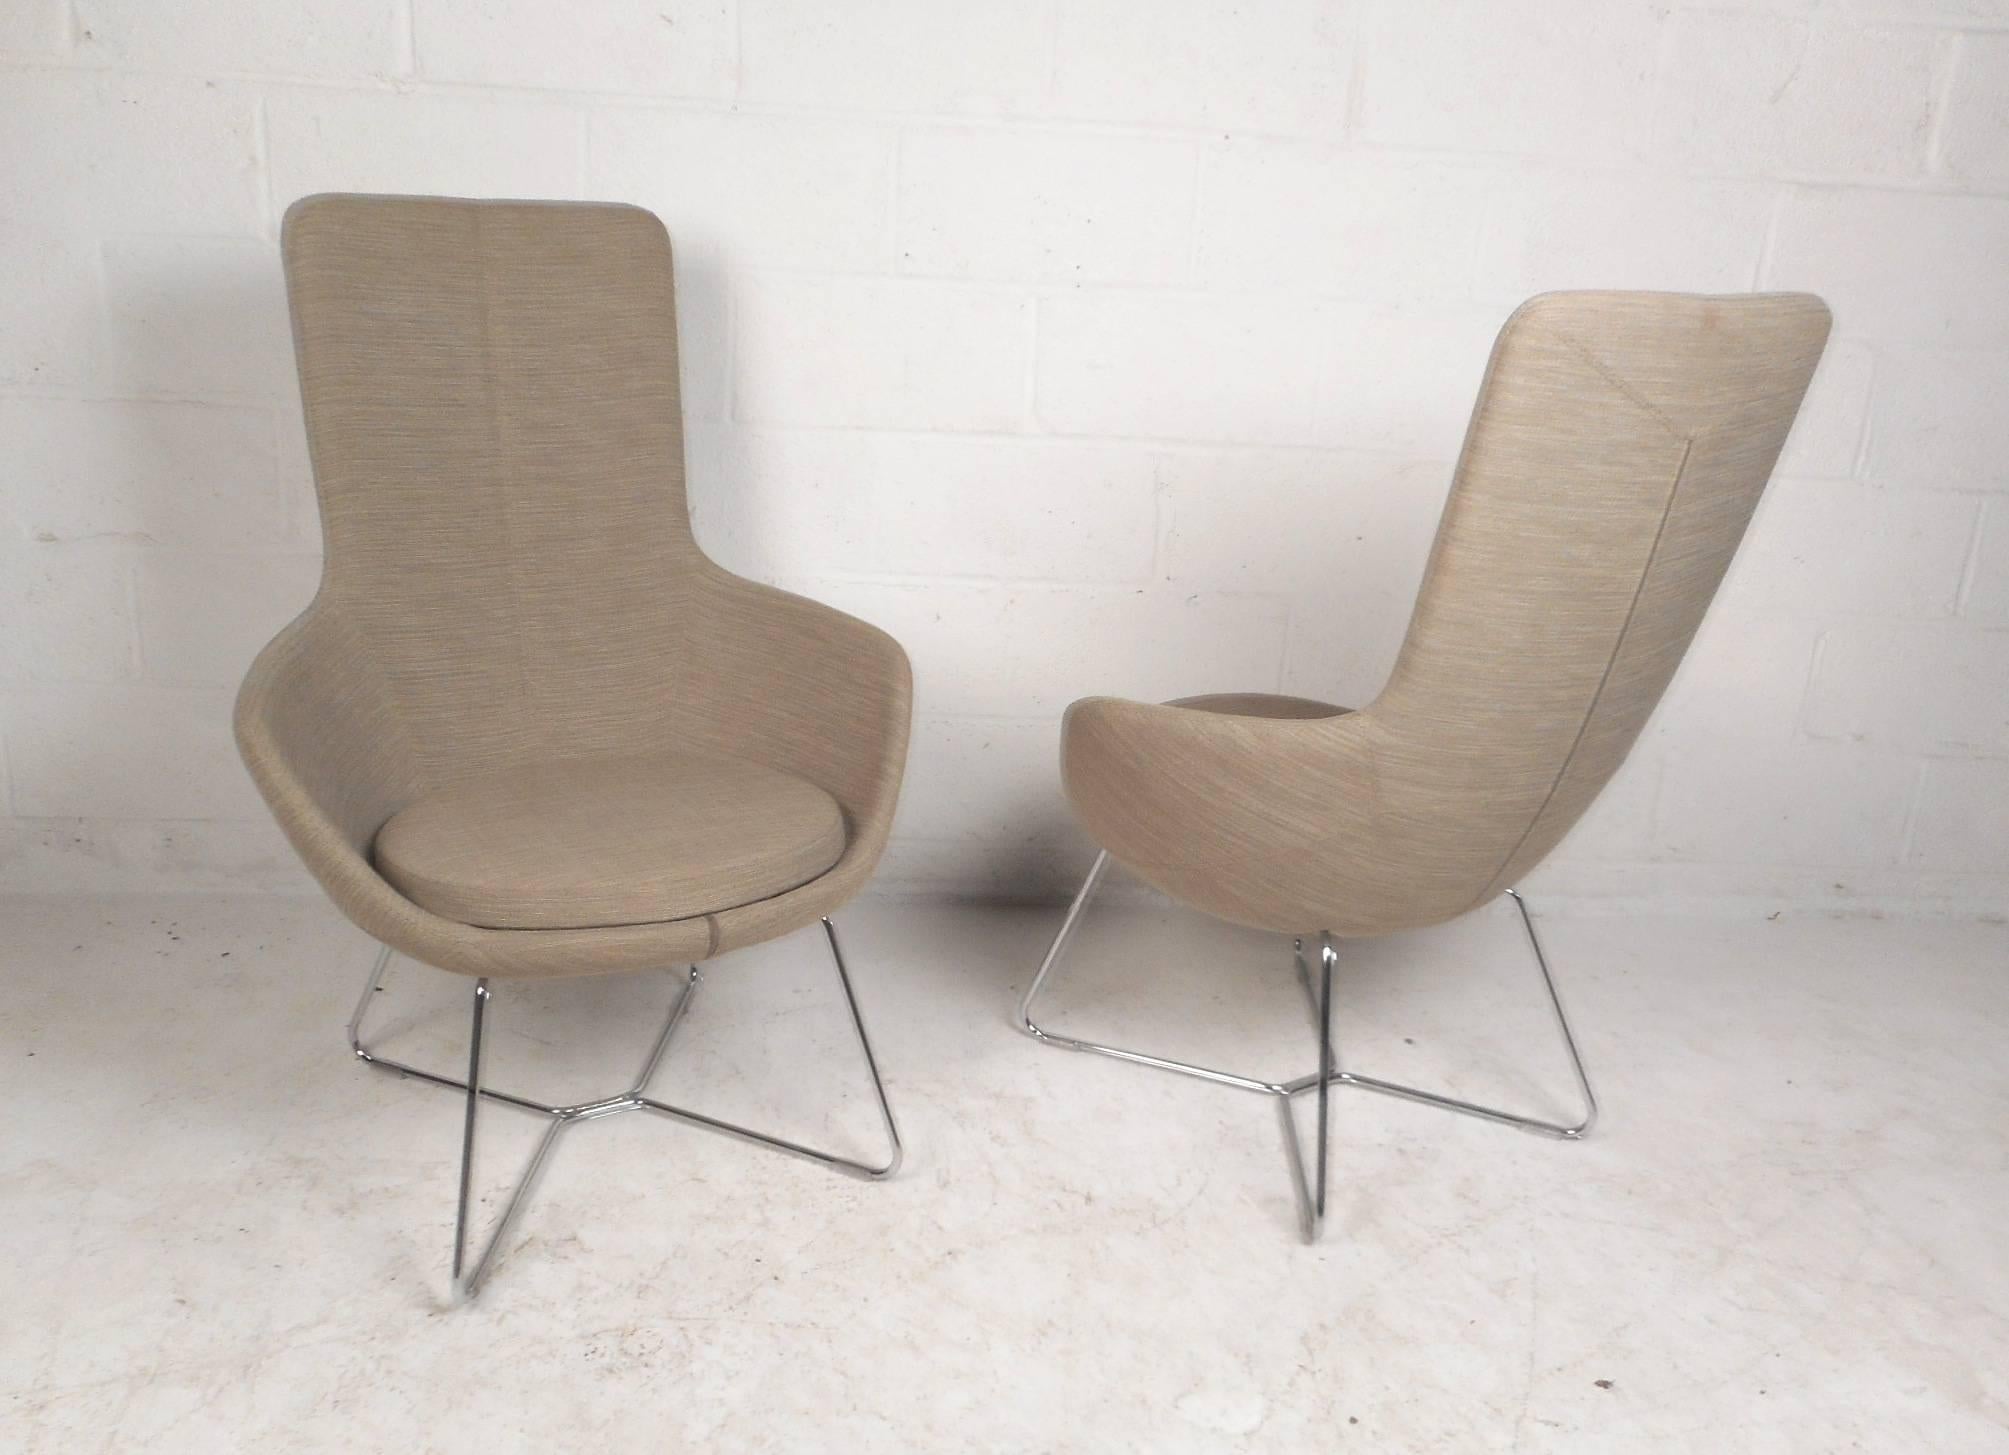 20th Century Pair of Mid-Century Style High back Lounge Chairs For Sale